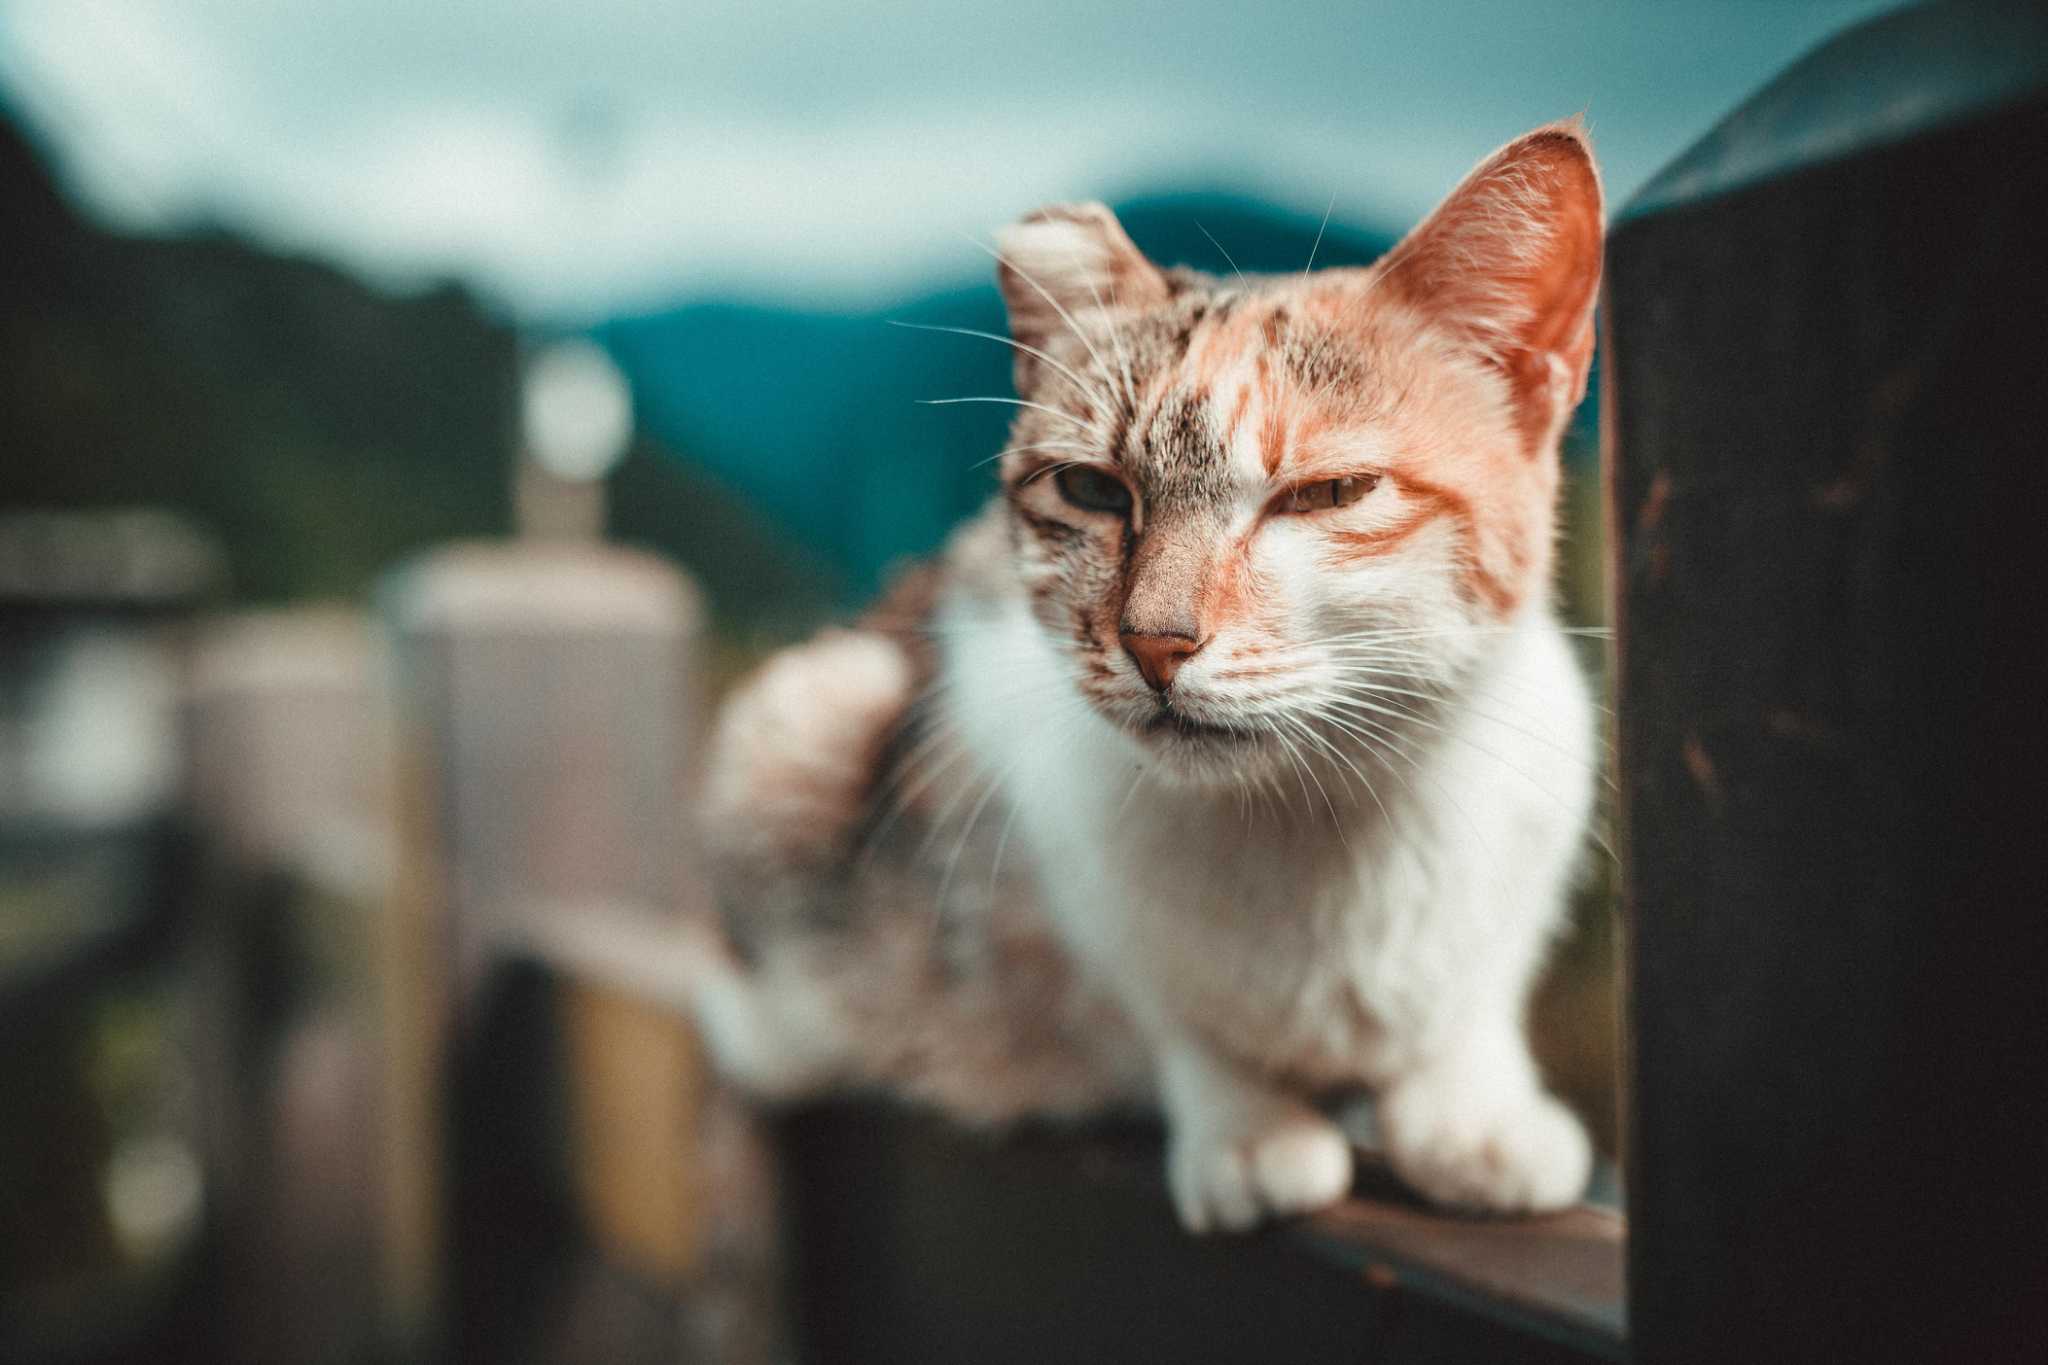 Why Some Outdoor Cats Are Missing The Tips Of Their Ears